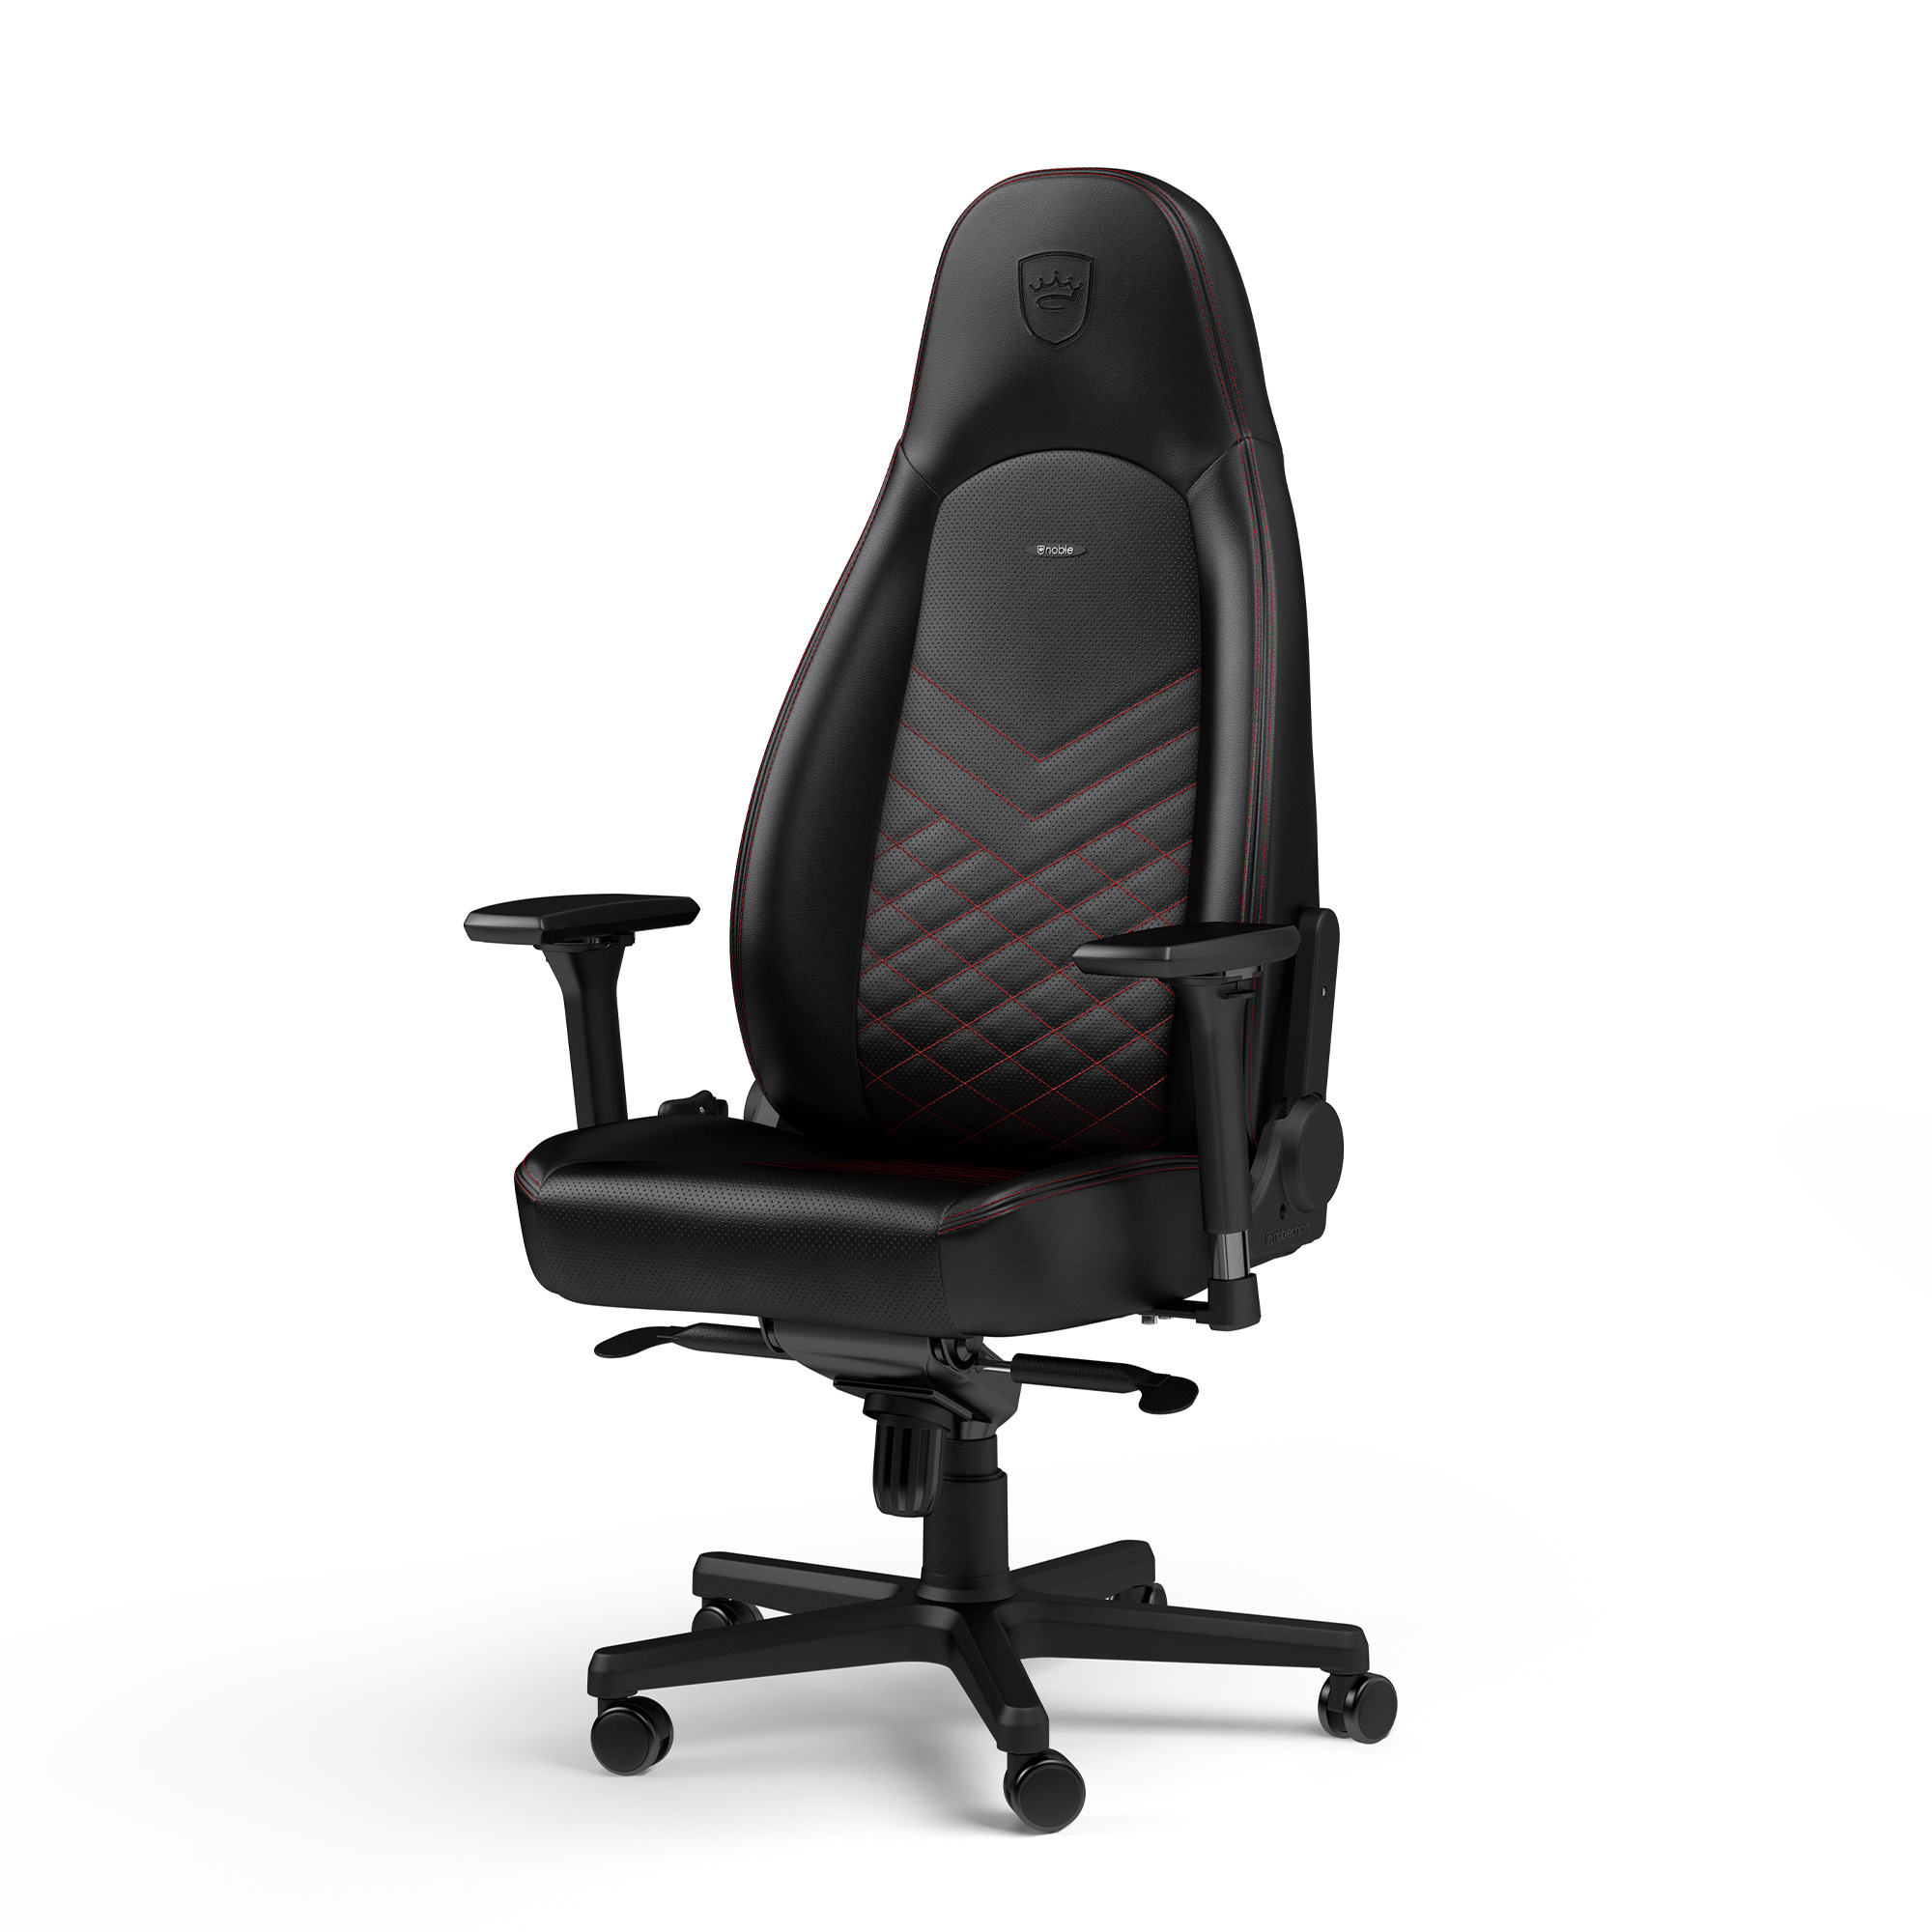 B Grade noblechairs ICON Gaming Chair - Black/Red